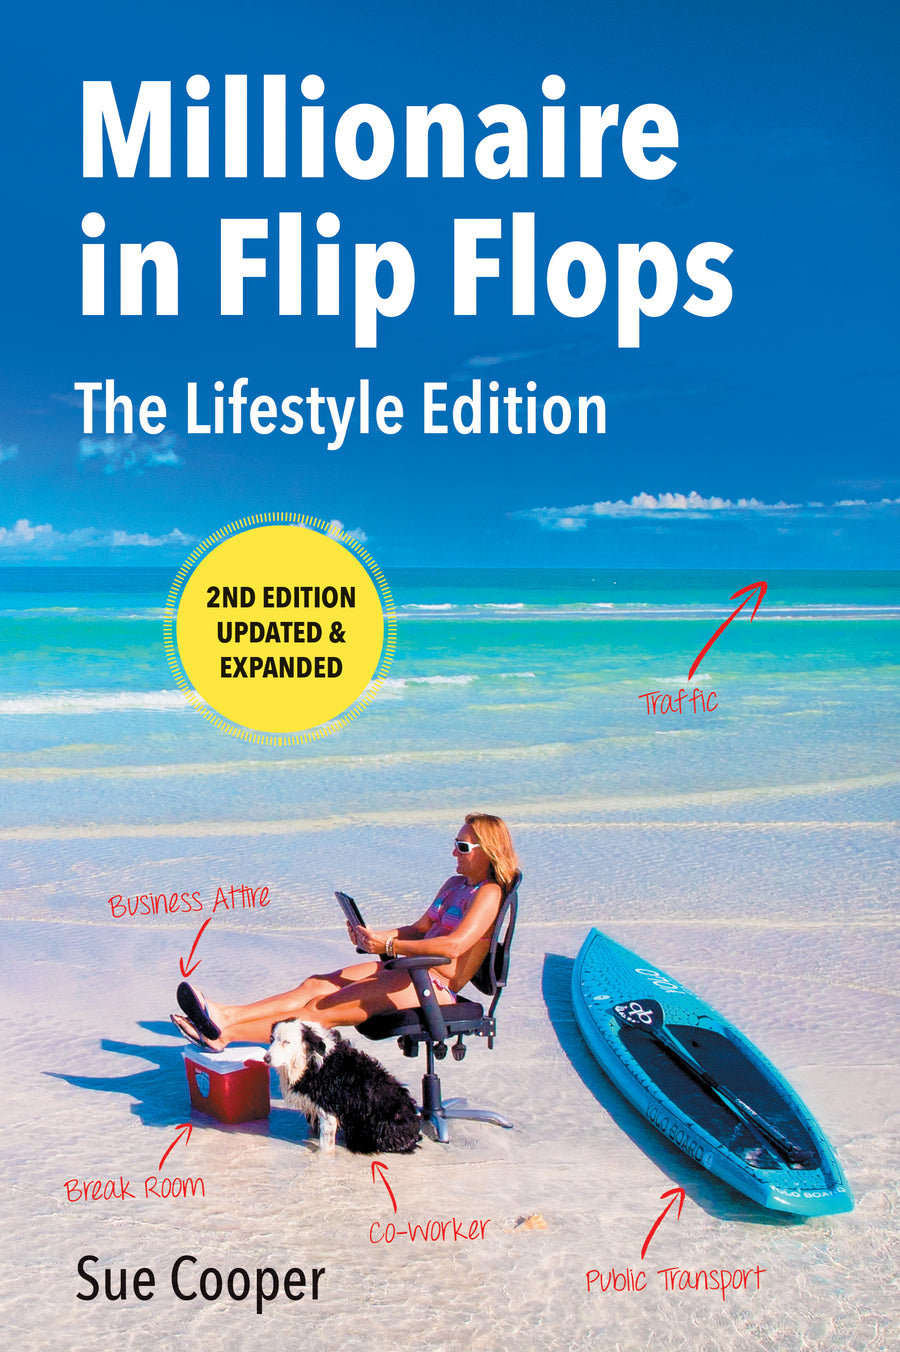 “Millionaire in Flip Flops” lifestyle self-help book by Lazy Dog owner Sue Cooper